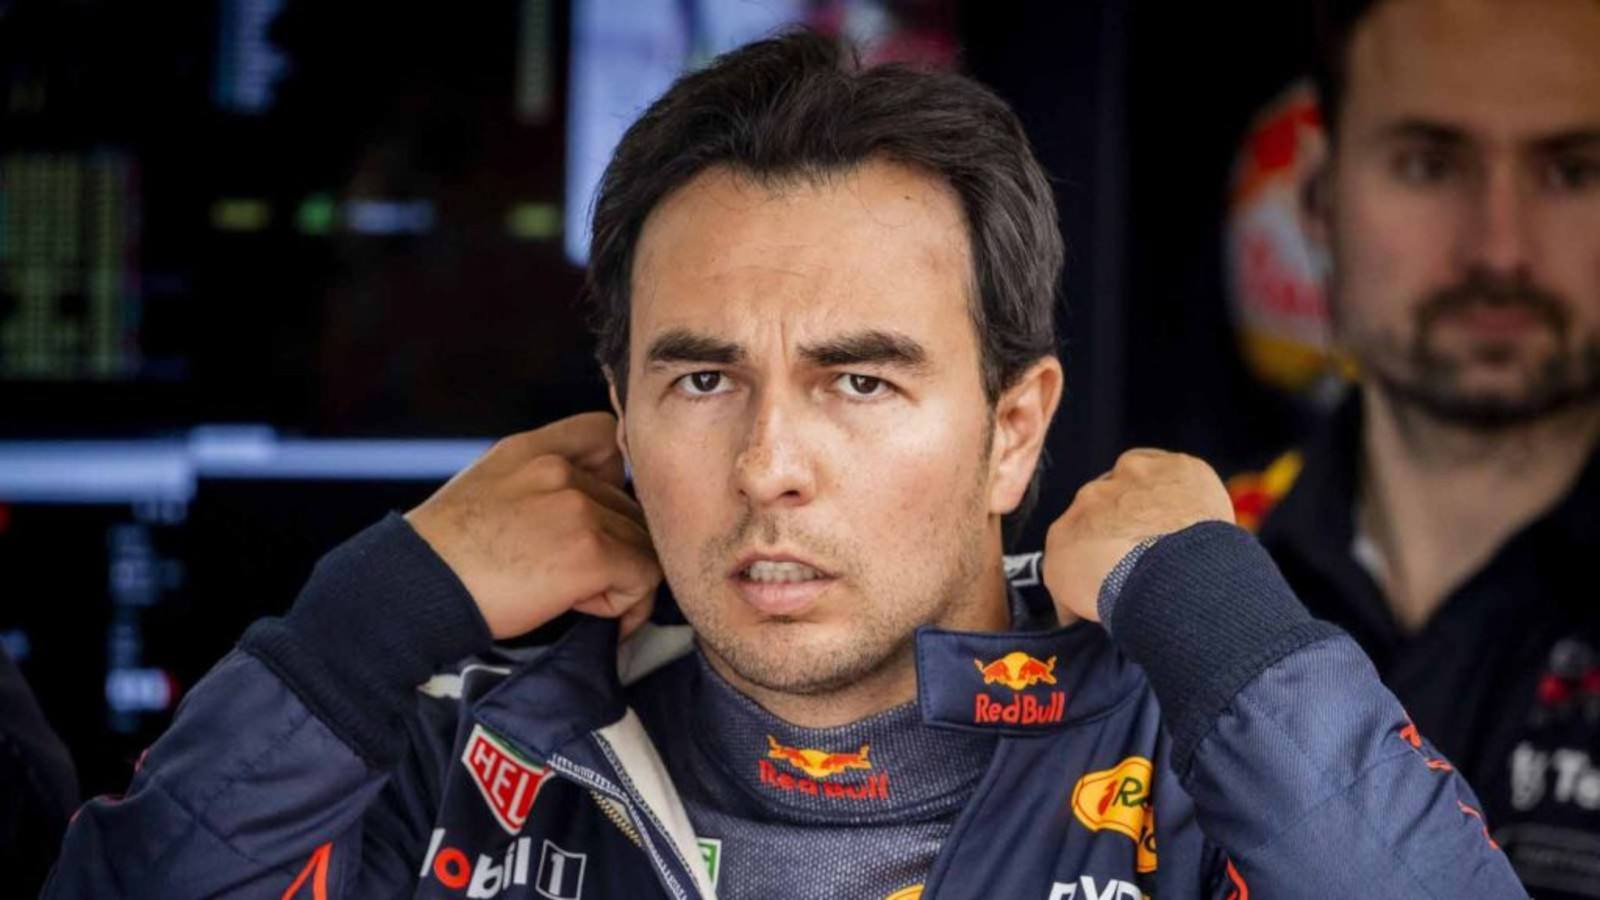 Sergio Perez looking focused as he prepares for a session. Silverstone July 2022.